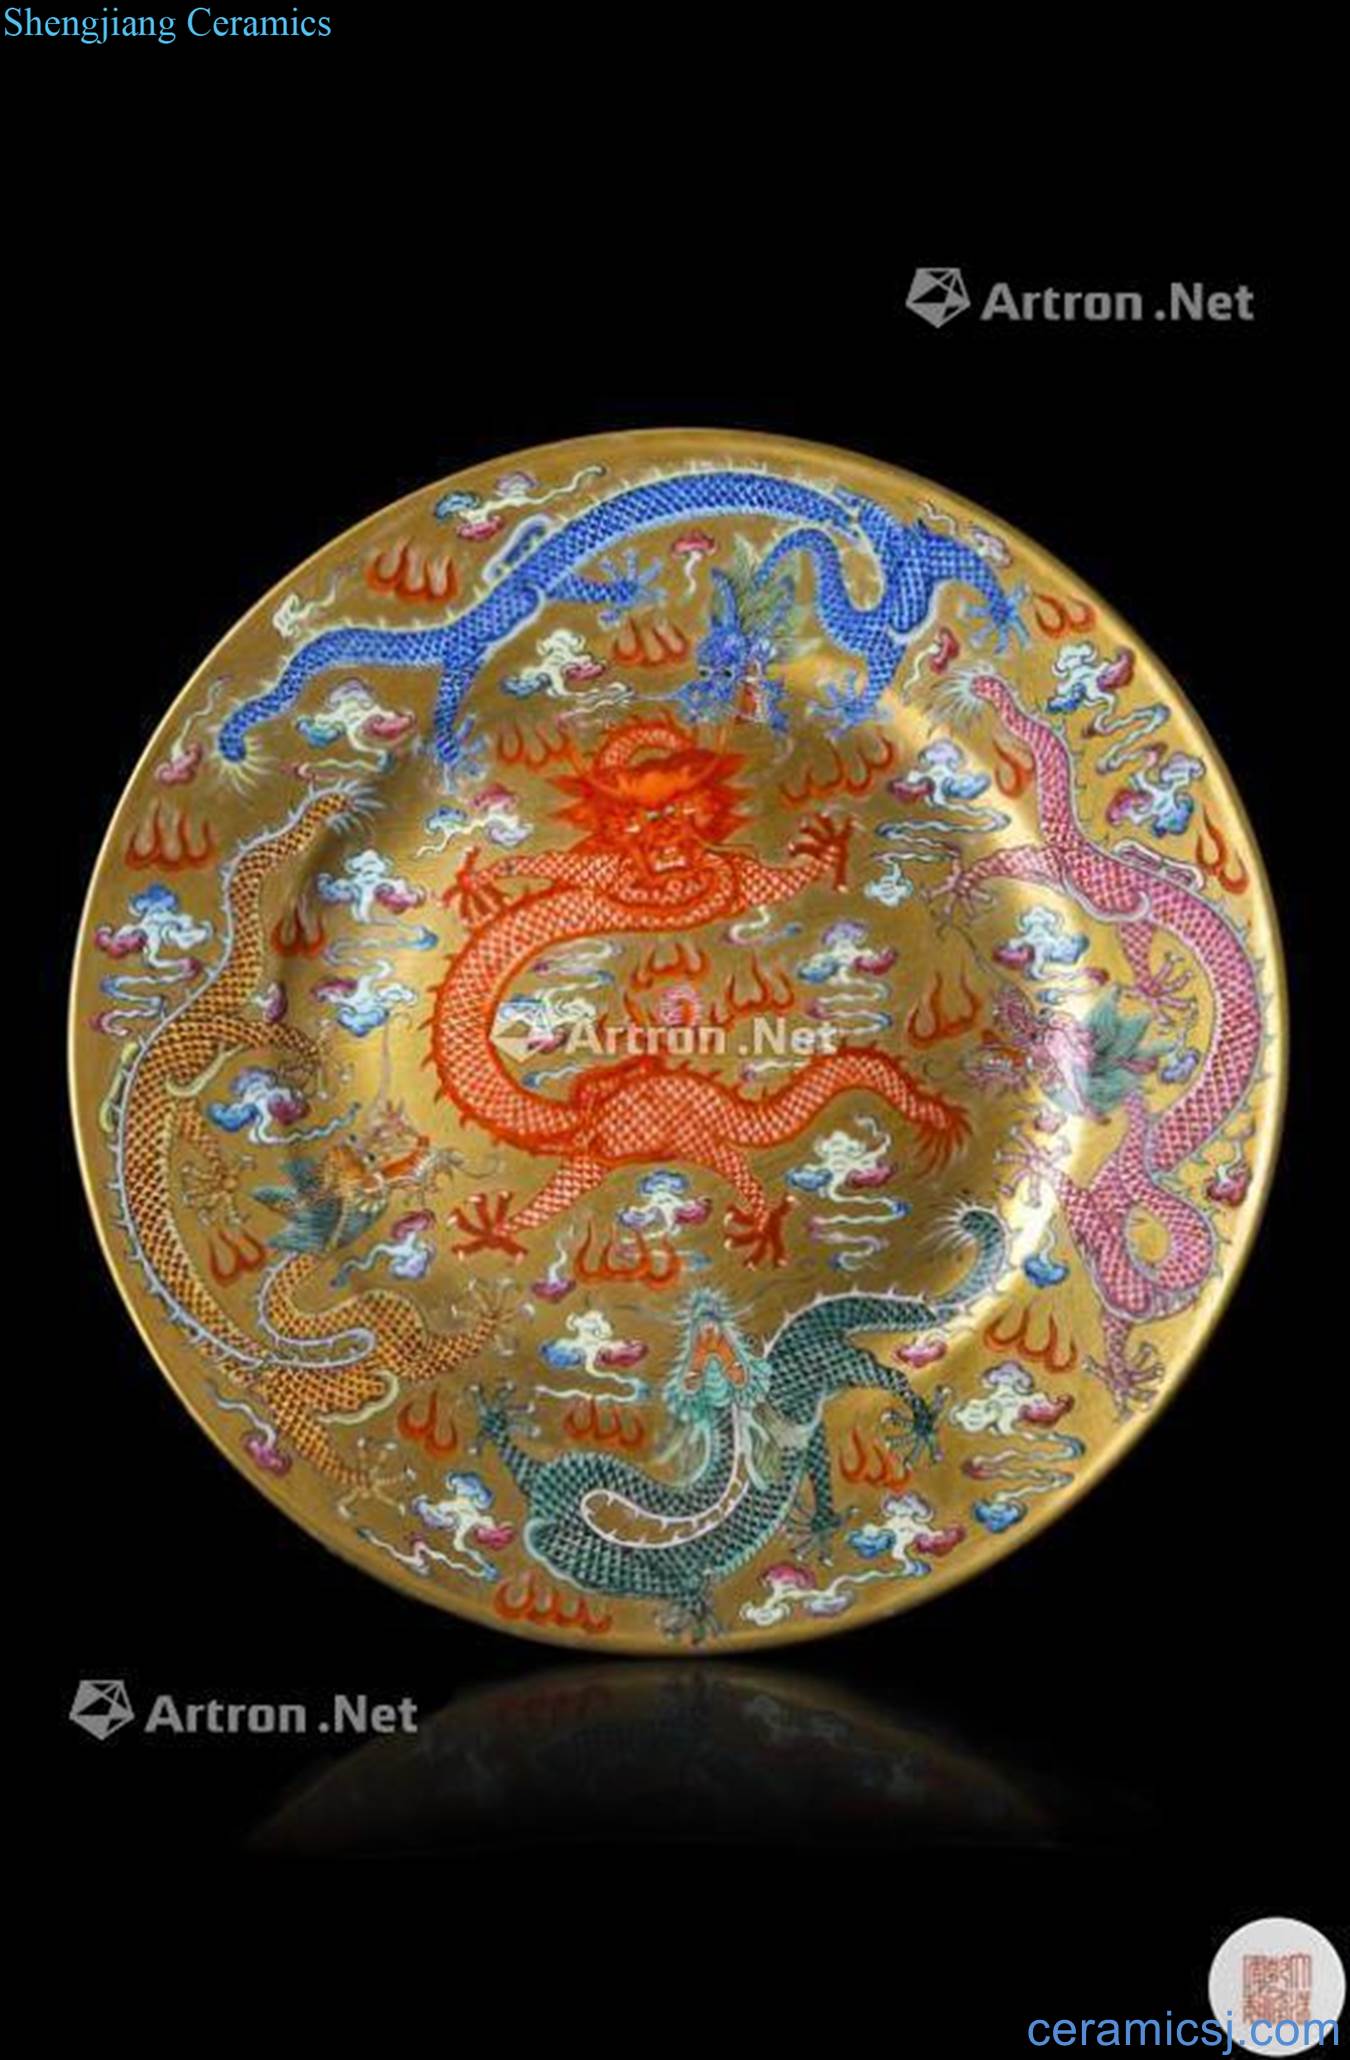 Newest the Qing dynasty (1644-1911), A porcelain dish decorated in colourful enamels with five dragons chasing the flaming pearl against A gilt ground, with apocryphal Qianlong mark to the base of China